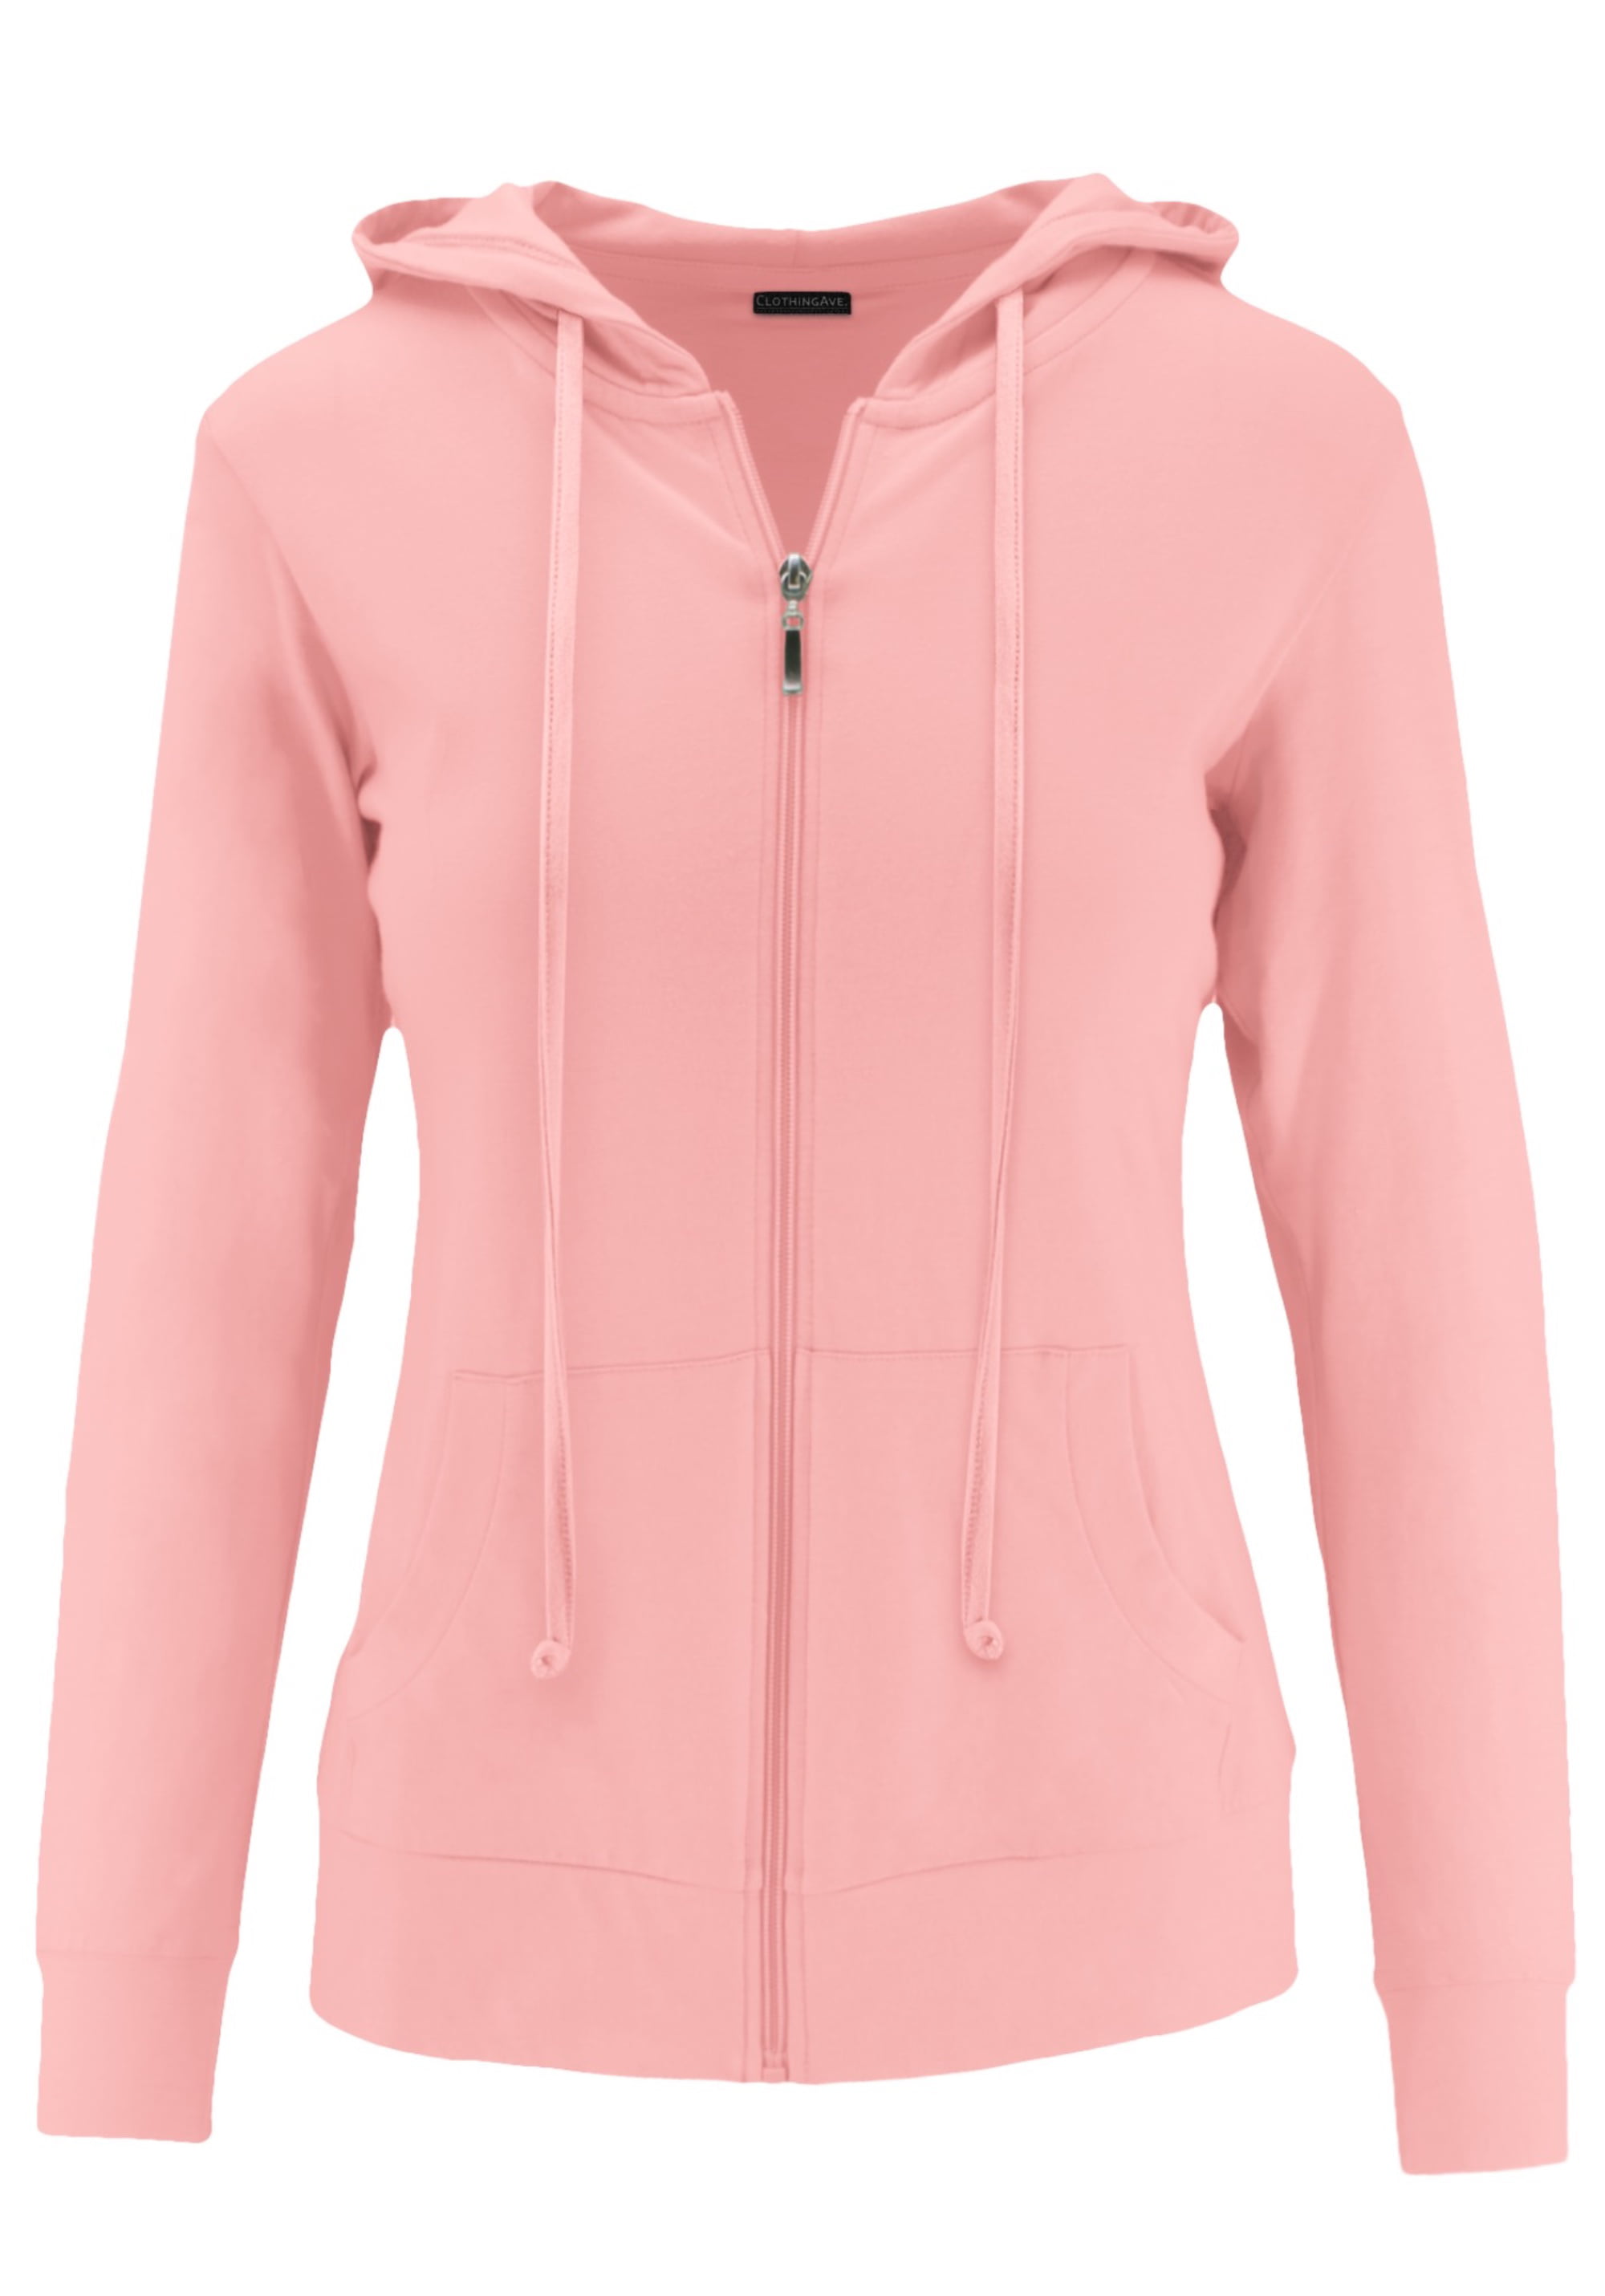 lung lonely Accordingly ClothingAve. Women's Lightweight Comfy Zip-Up Hoodie | Active, Casual,  Running Cotton Blend Long Sleeve Jacket Female Hoodie - Walmart.com